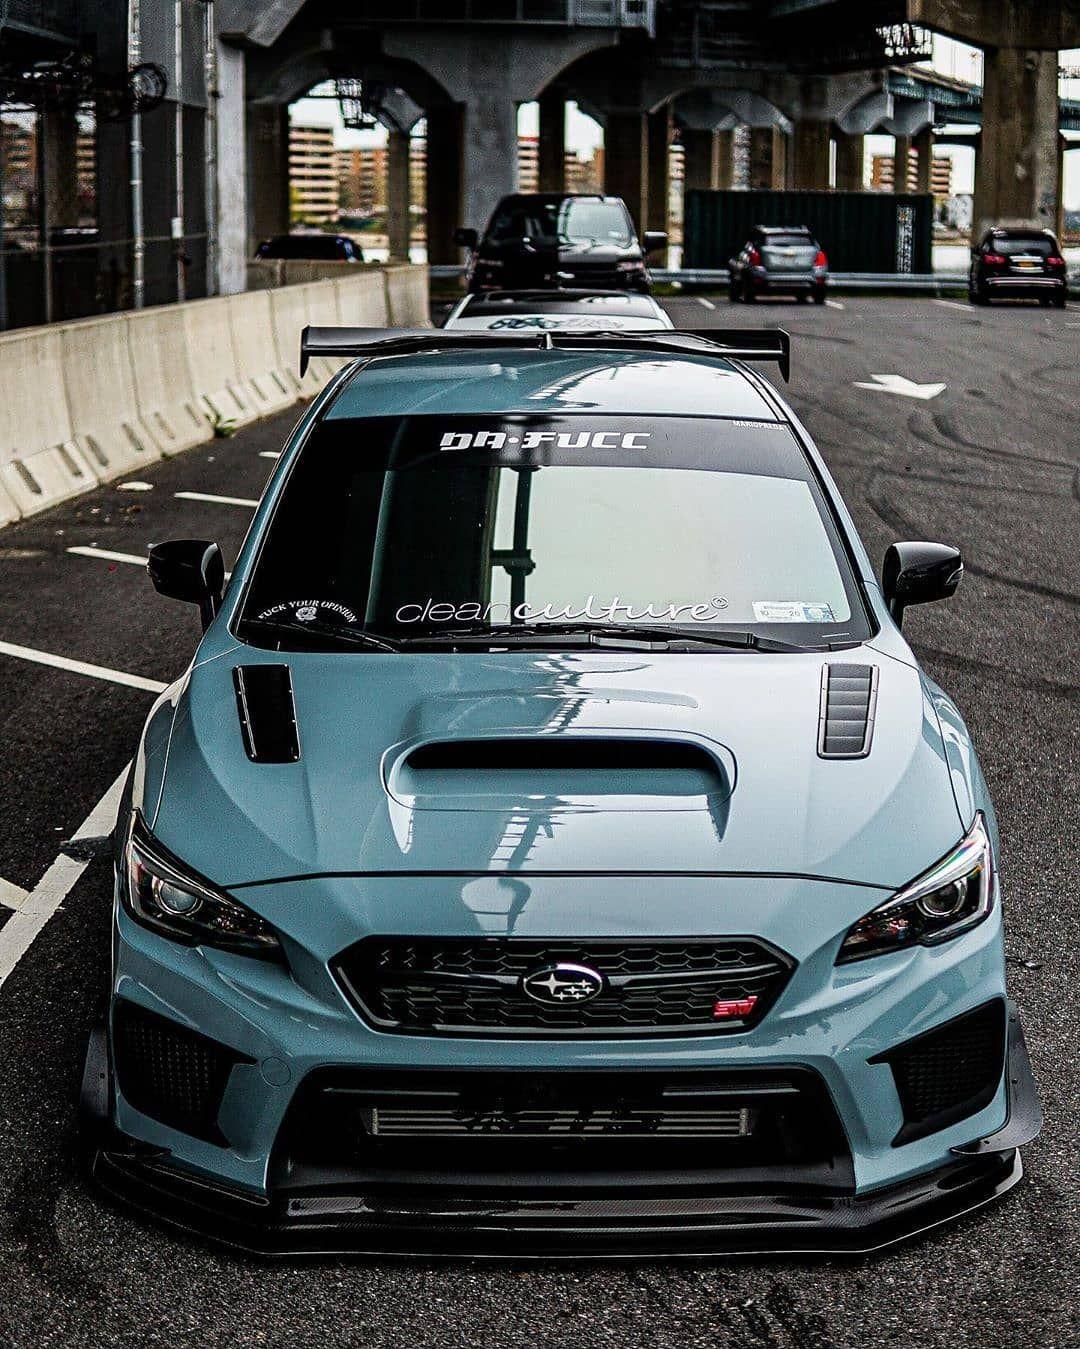 Check Out Our Subaru Sti T Shirts Collection Click The Link Or